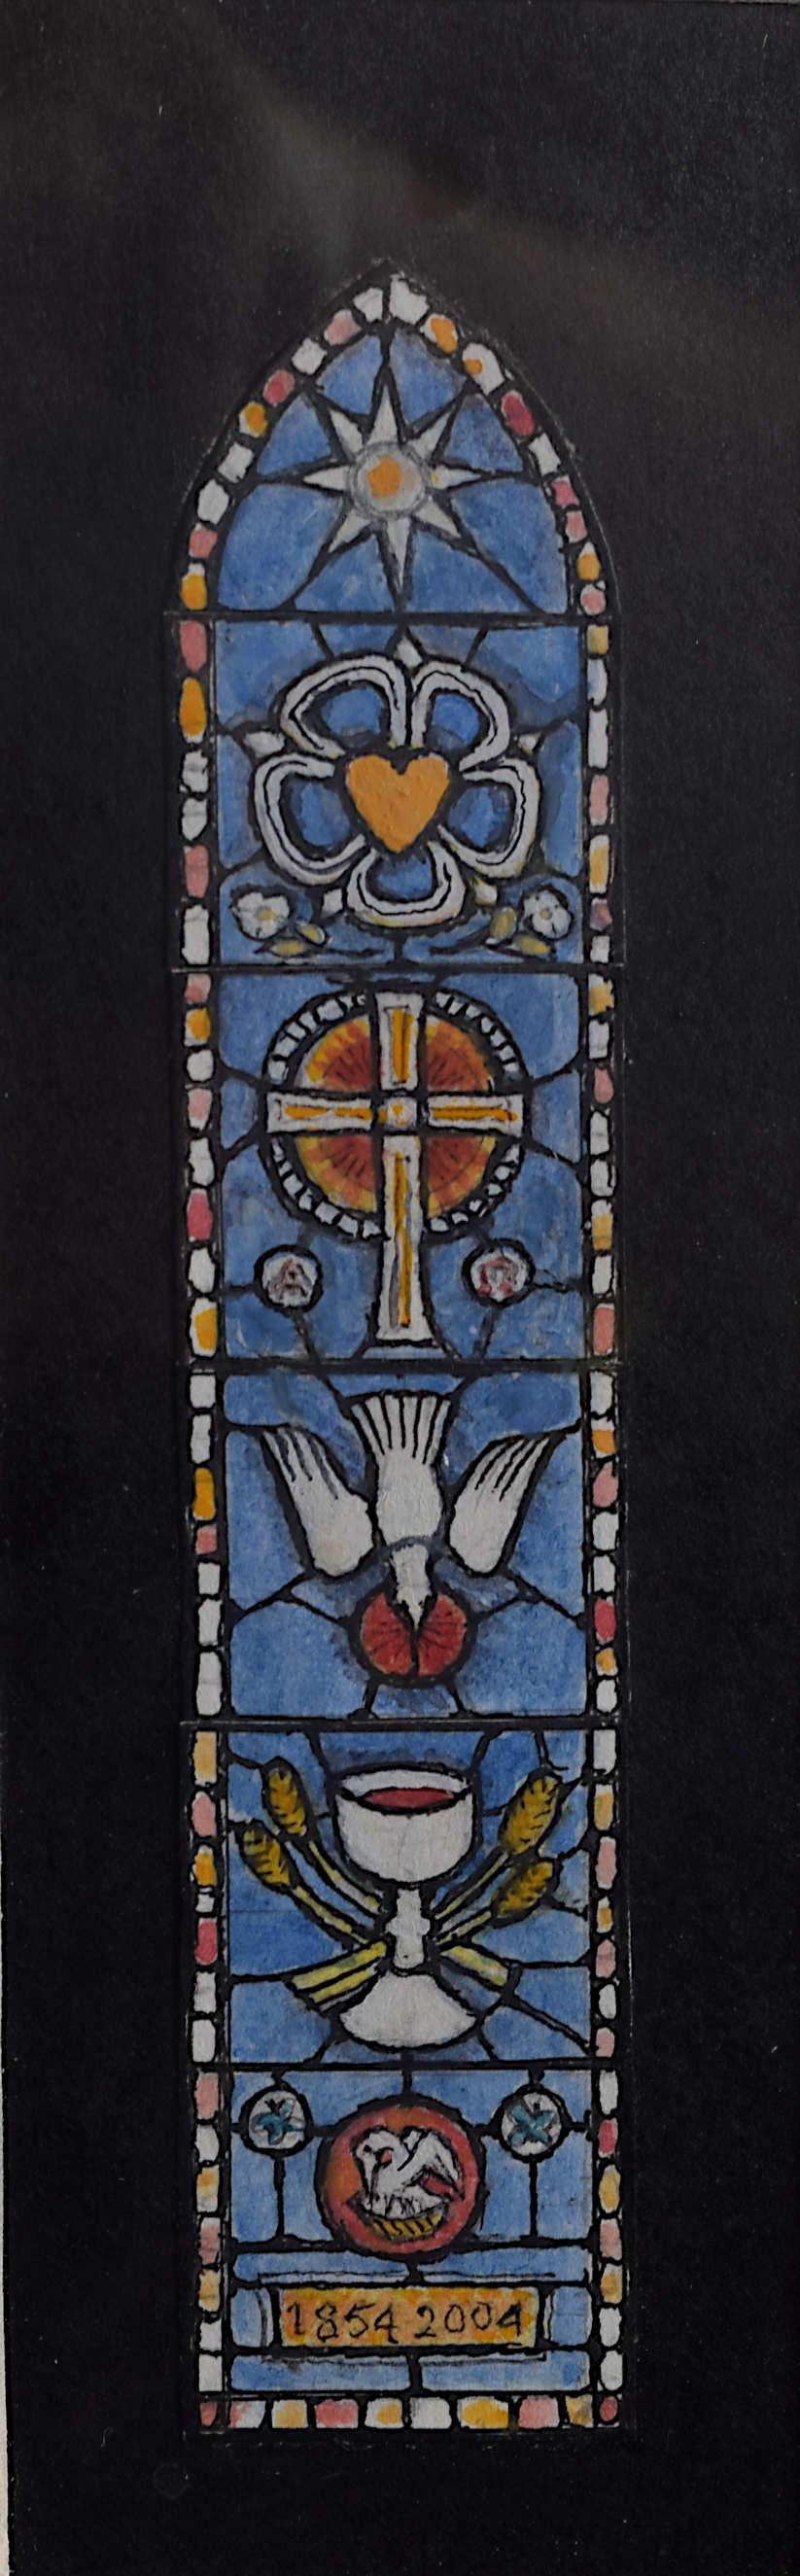 We acquired a series of watercolour stained glass designs from Jane Gray's studio. To find more scroll down to "More from this Seller" and below it click on "See all from this seller." 

Jane Gray (b.1931)
Stained Glass Design
Watercolour
16 x 5